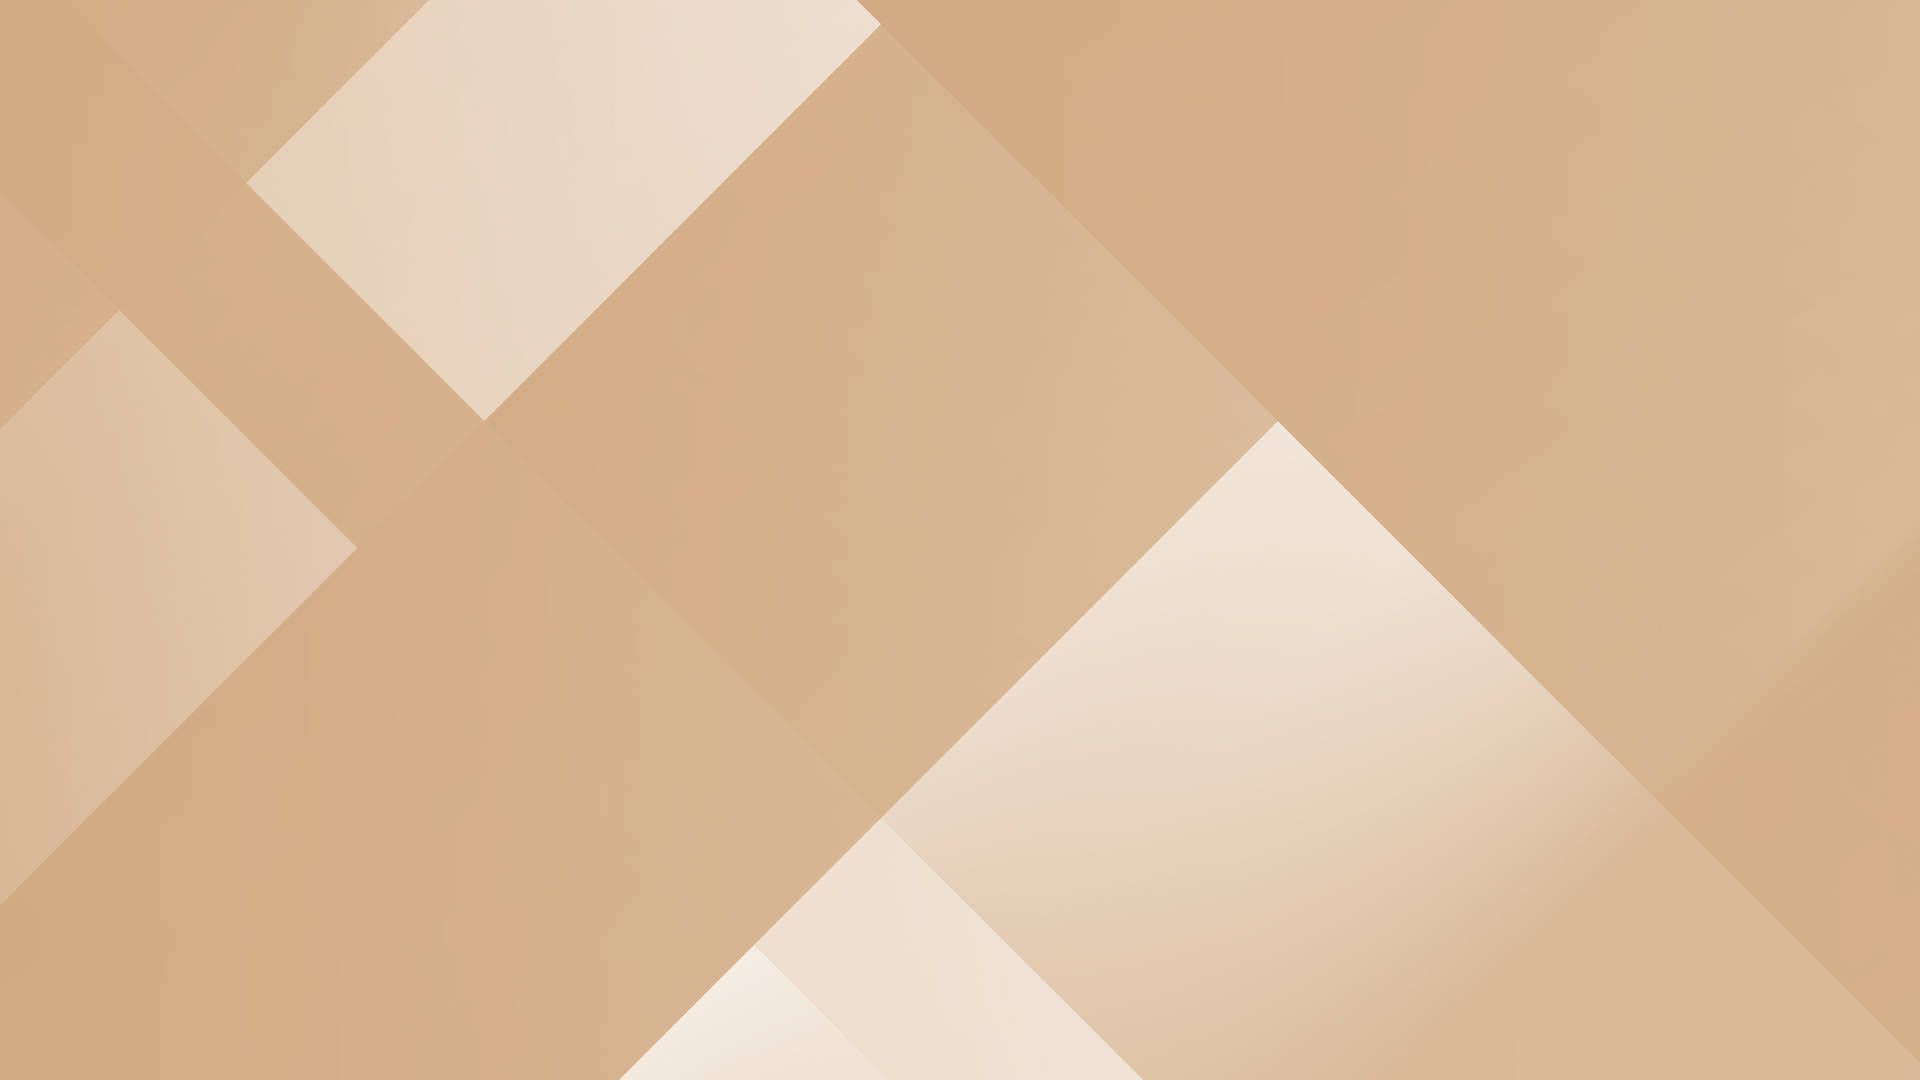 A beige background with white triangles - Cream, geometry